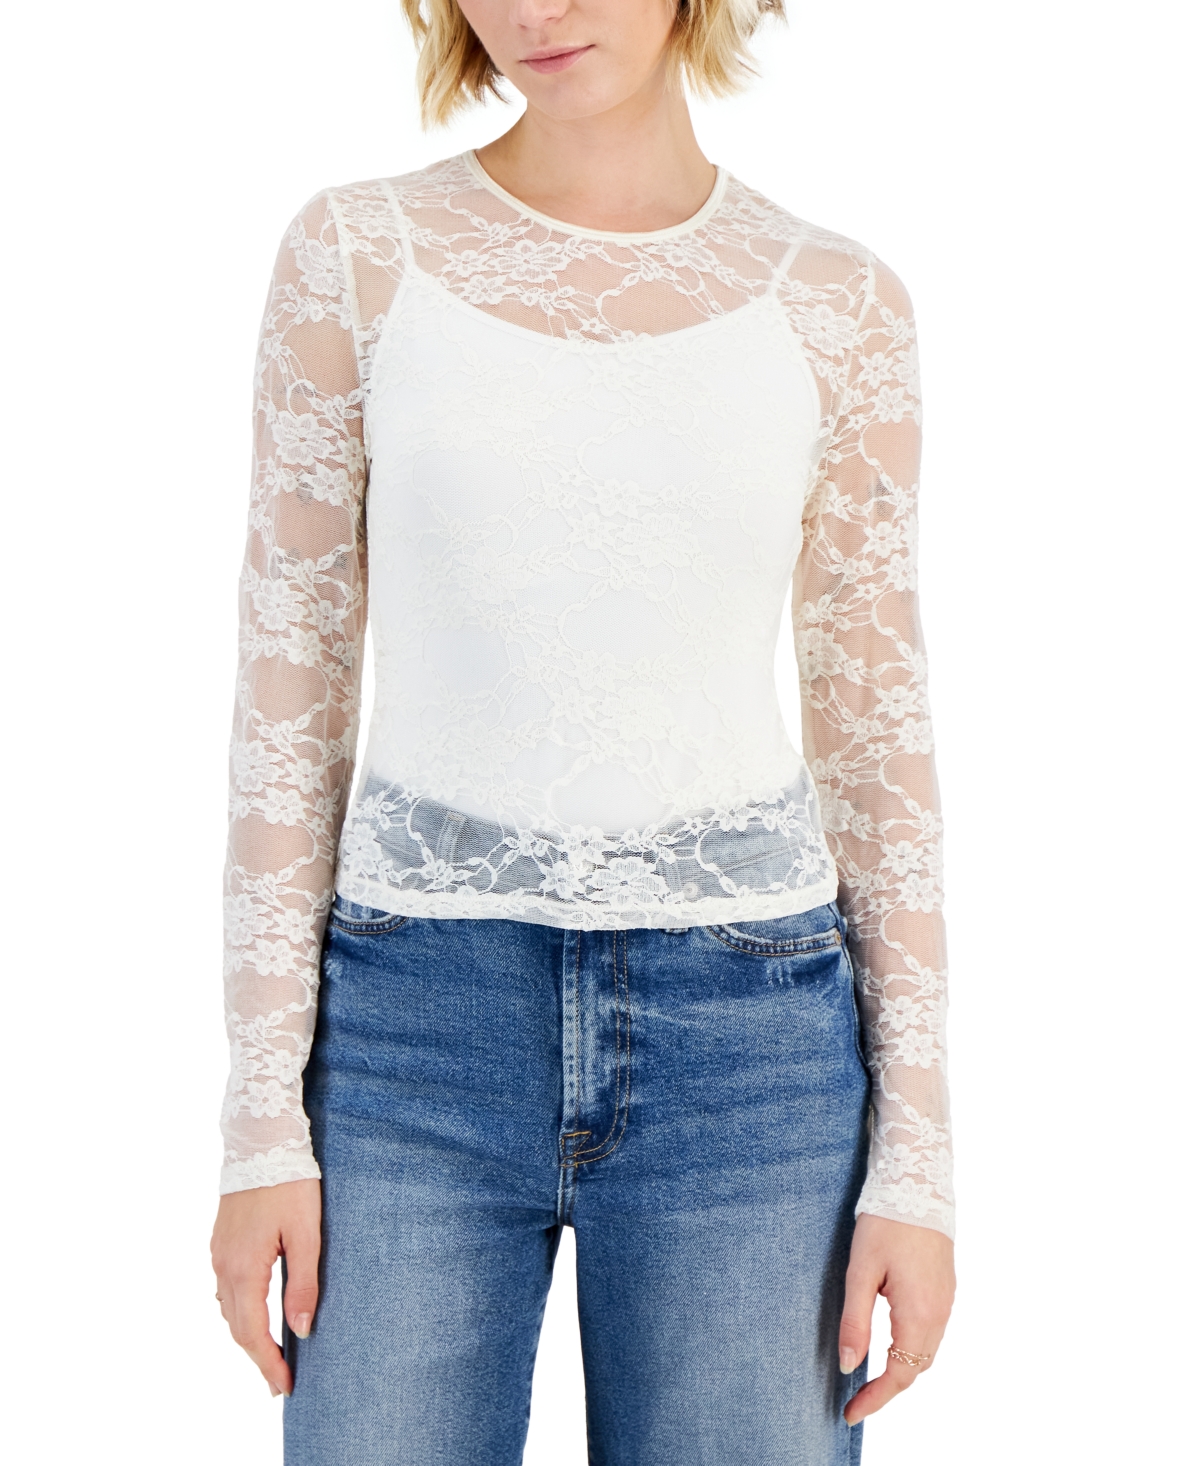 Juniors' Long-Sleeve Knit Lace Top - Ivory